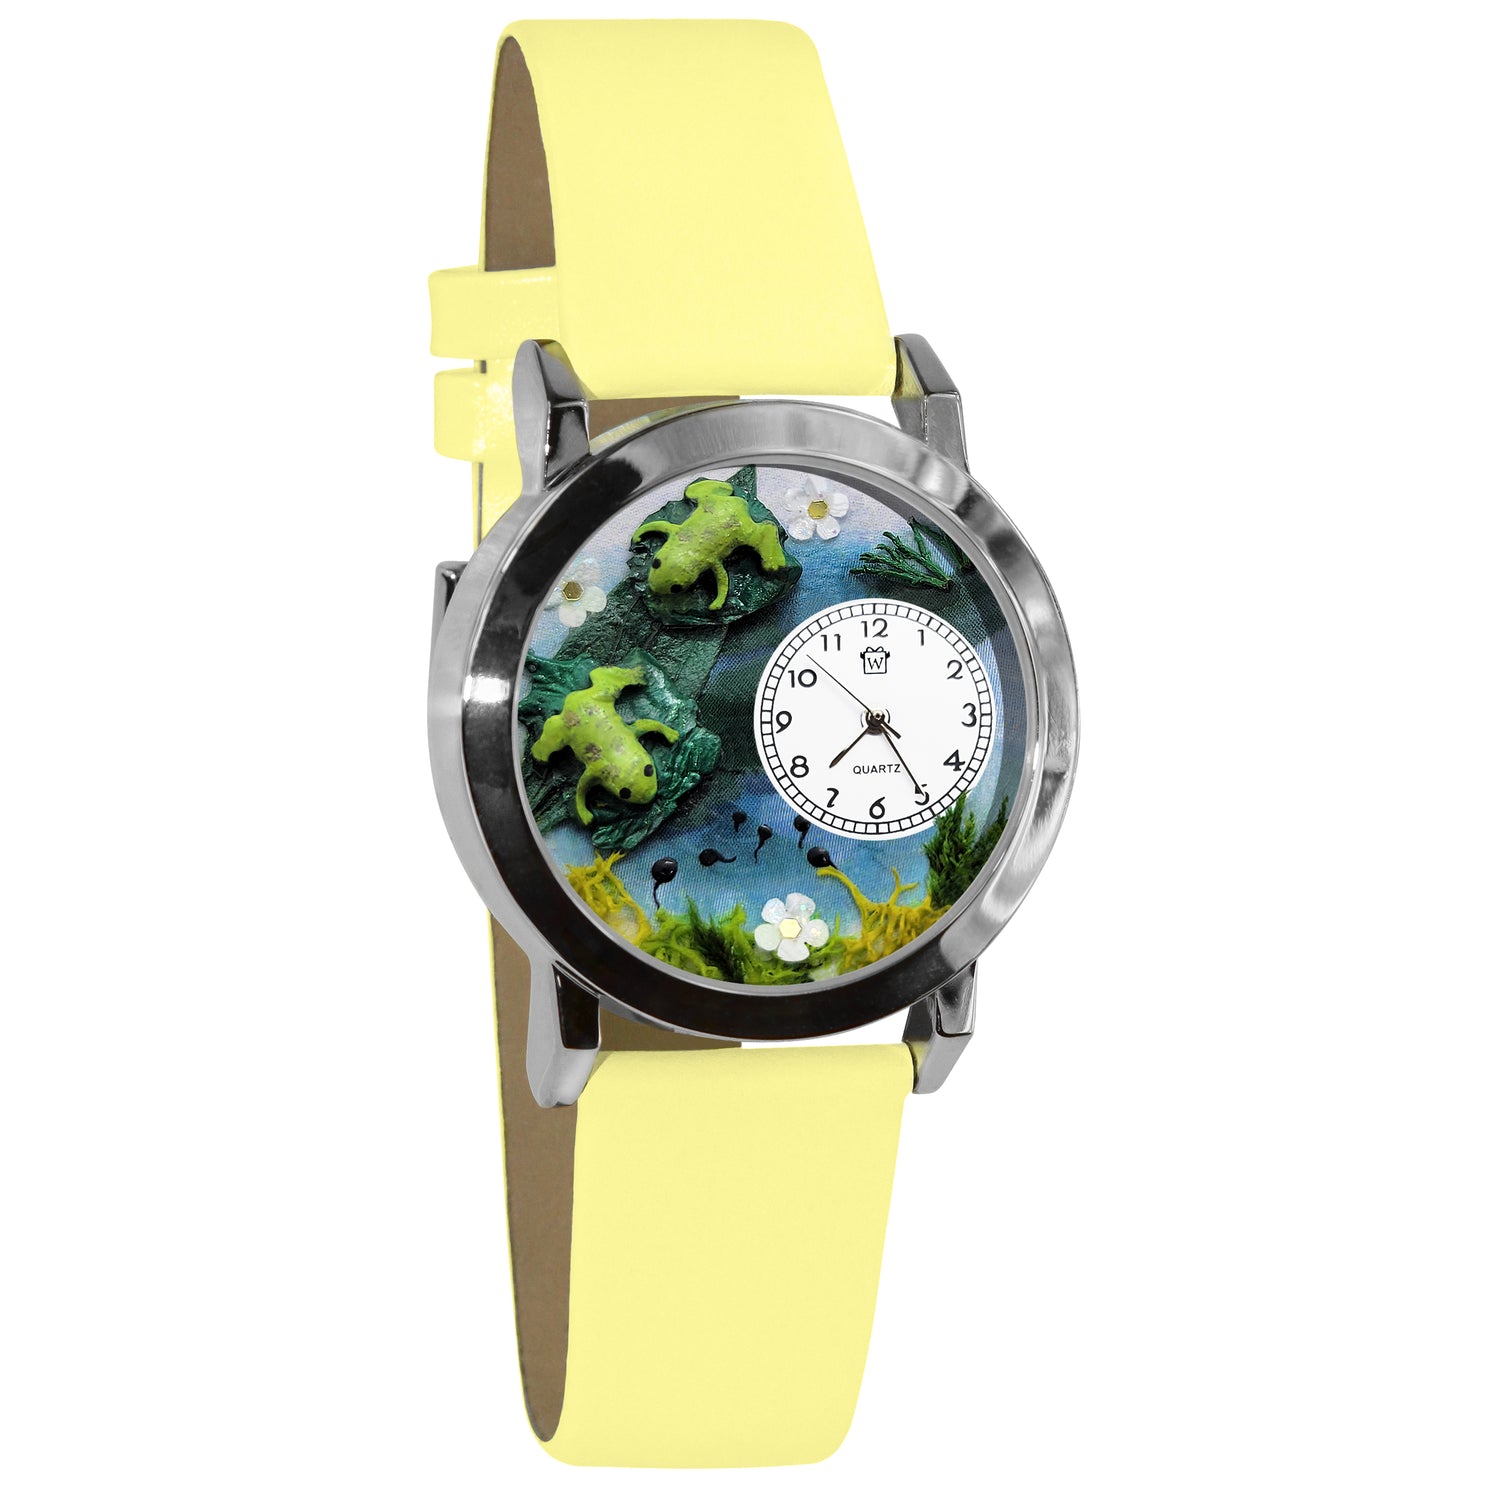 Whimsical Gifts | Frogs 3D Watch Small Style | Handmade in USA | Animal Lover | Outdoor & Garden | Novelty Unique Fun Miniatures Gift | Silver Finish Yellow Leather Watch Band